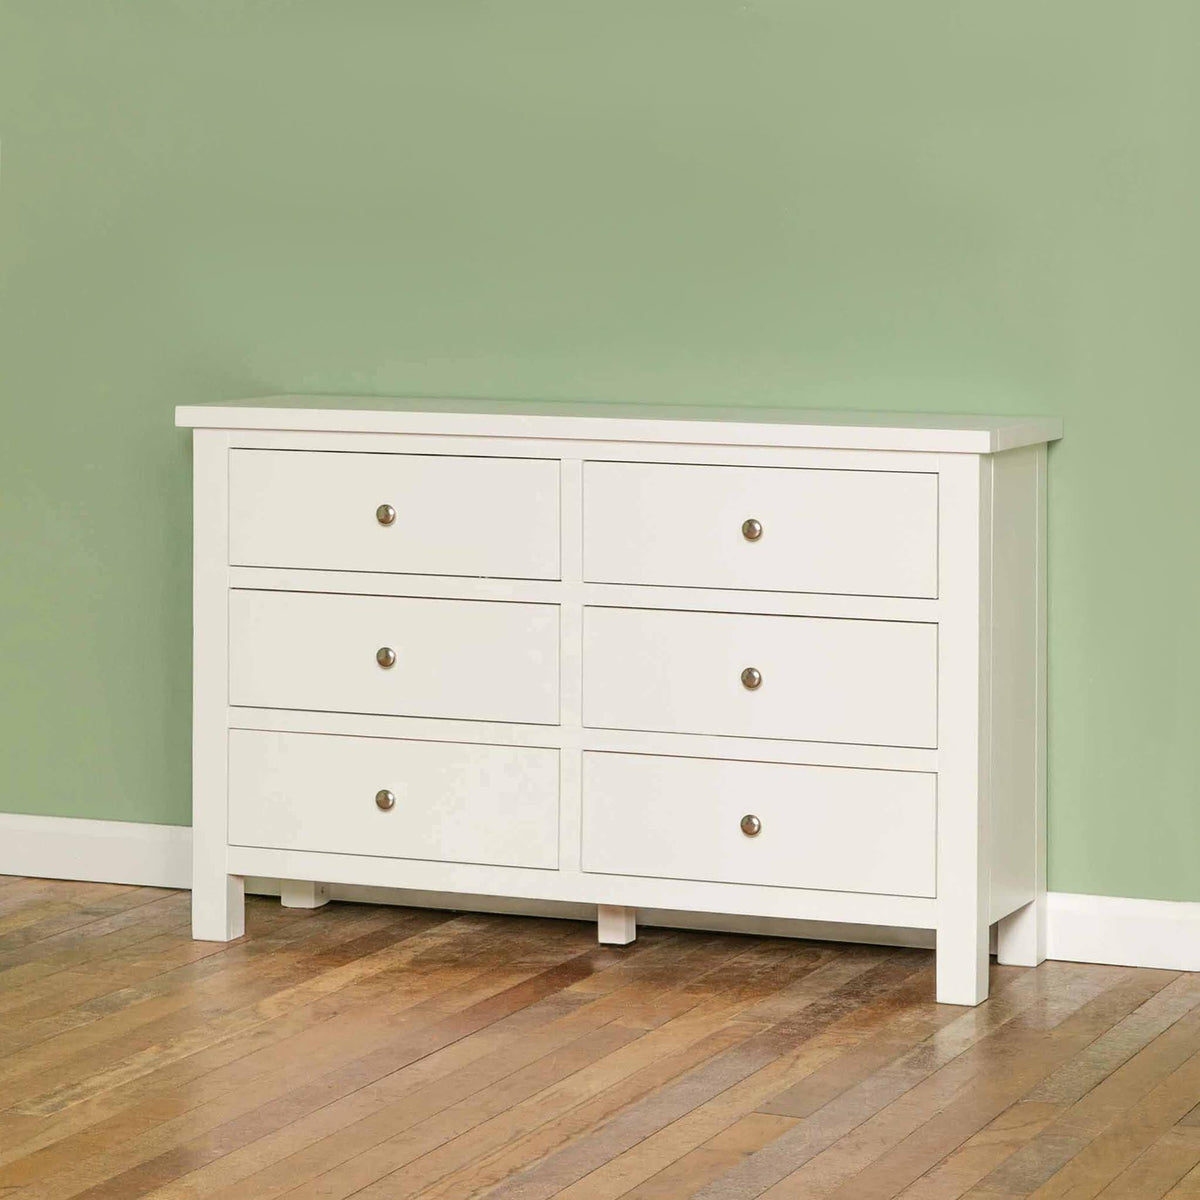 Cornish White Wooden Chest of 6 Drawers - Lifestyle side view